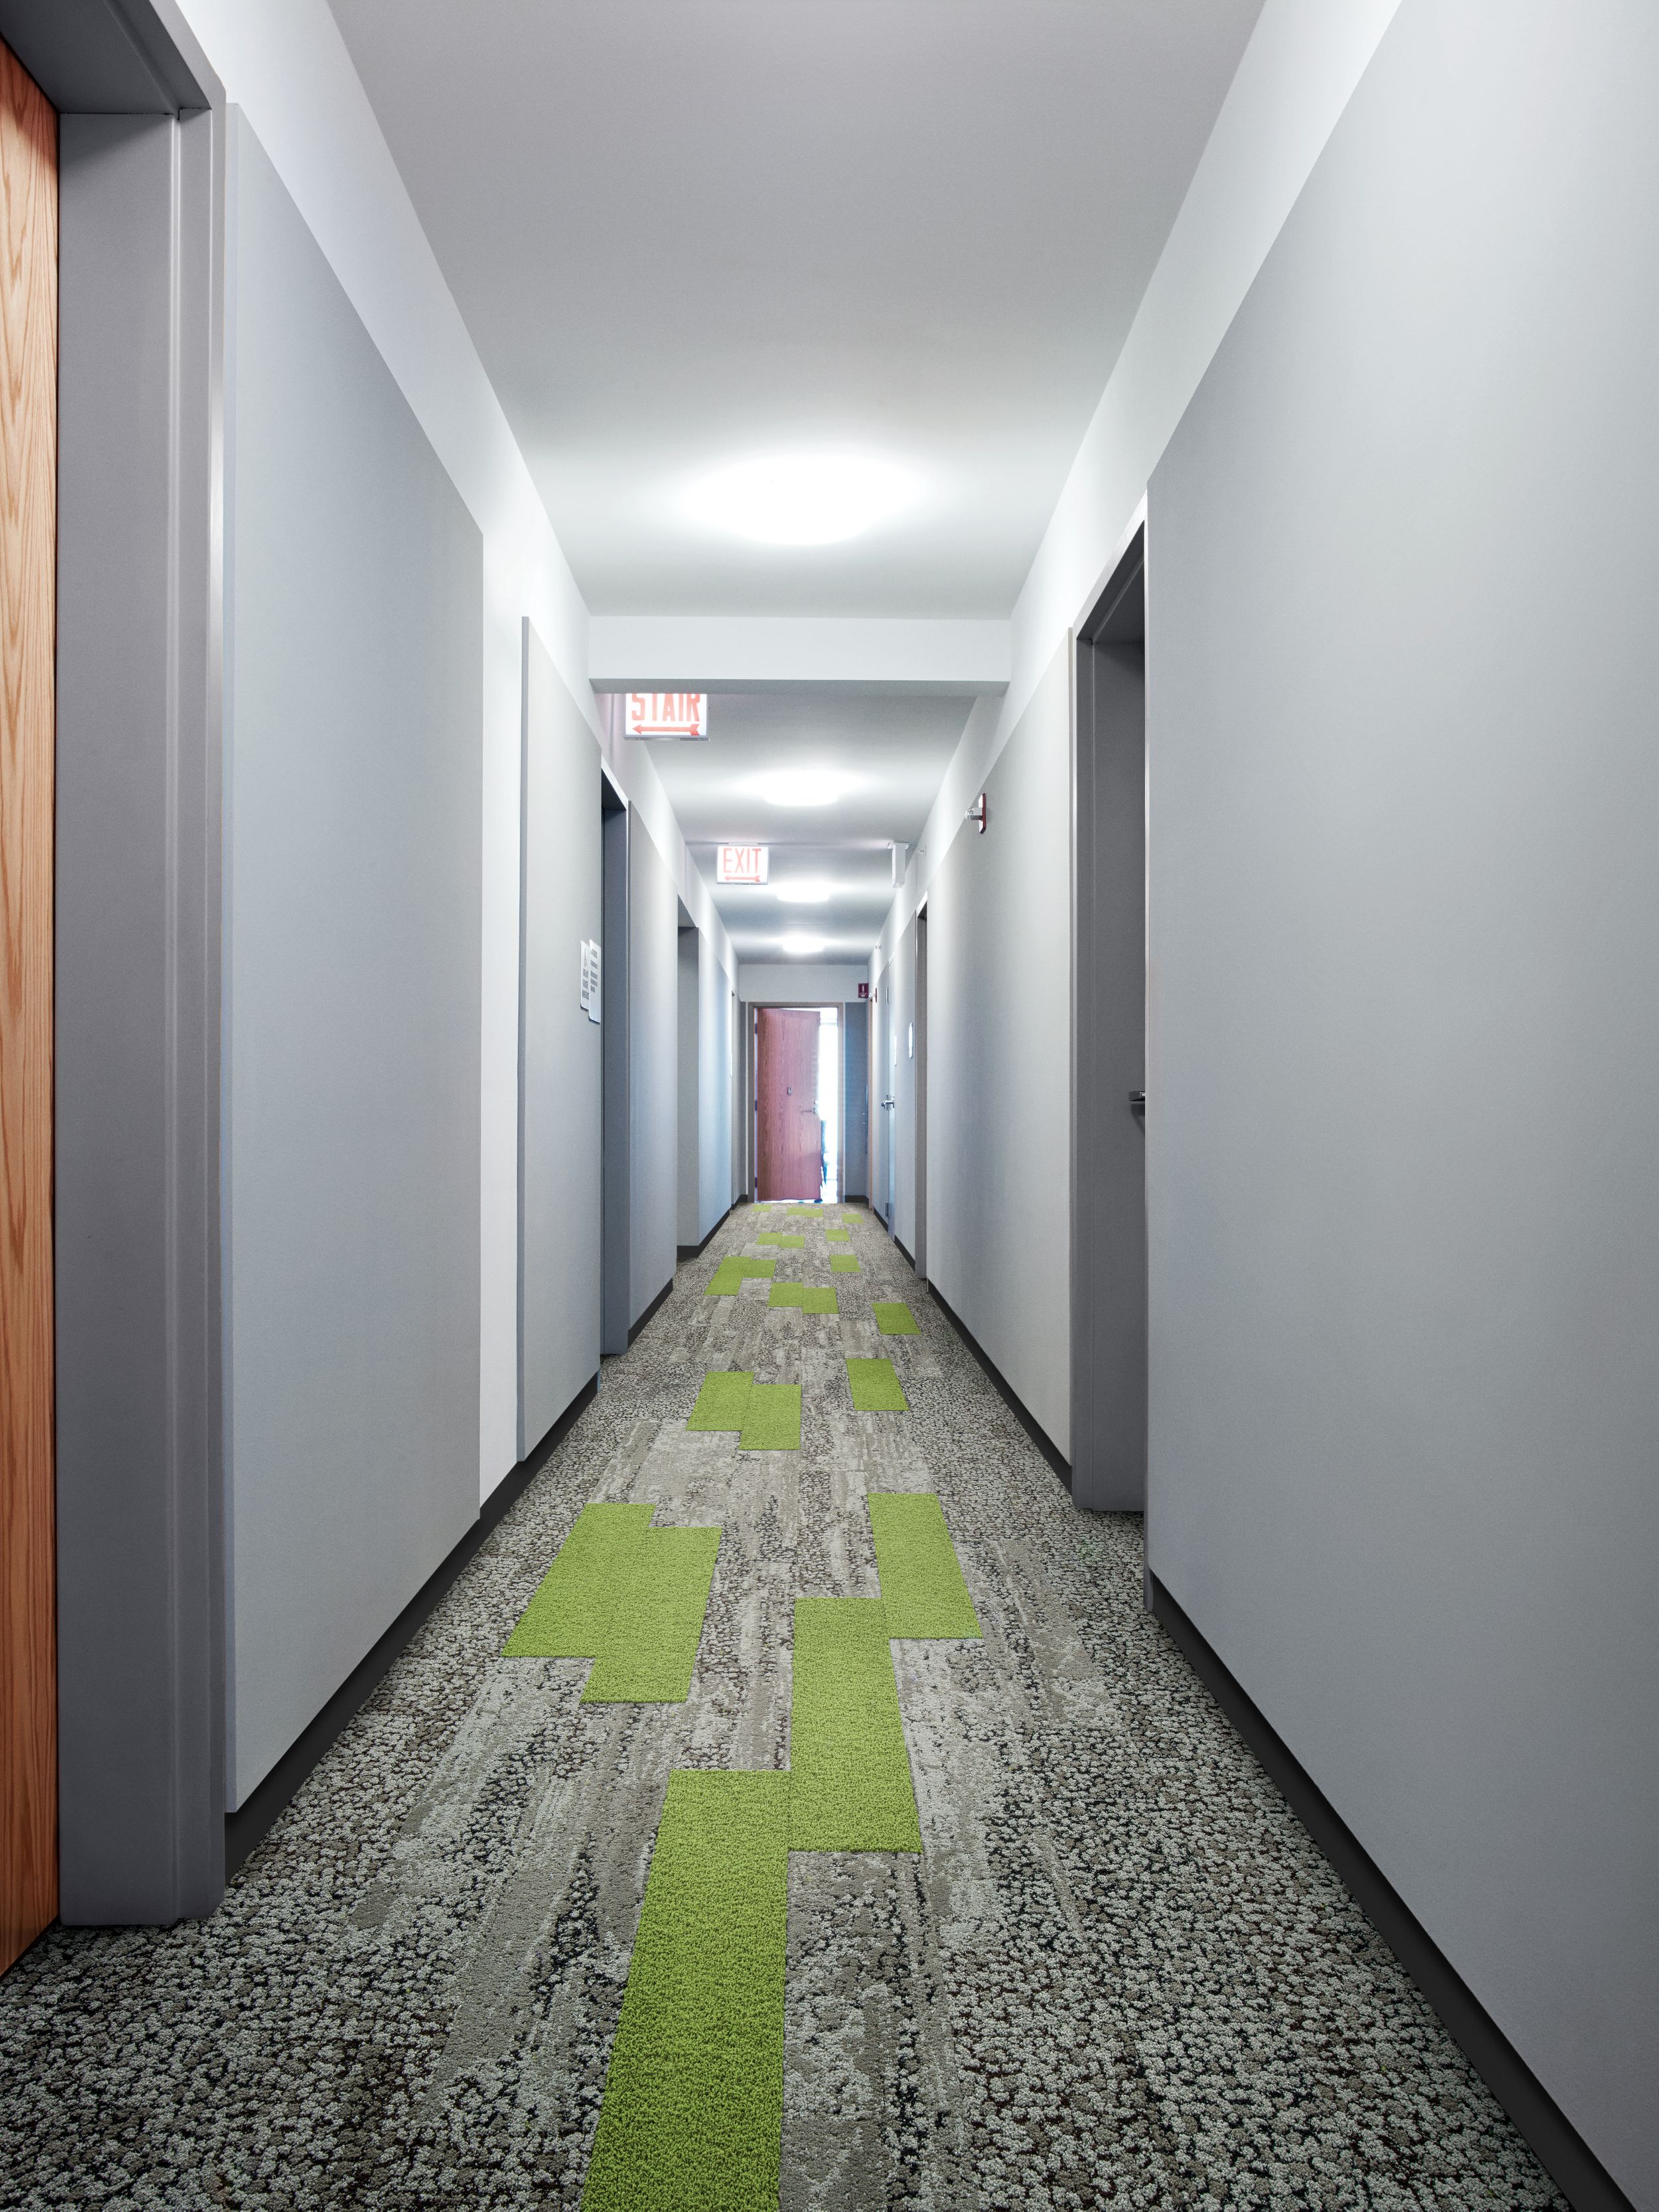 Interface HN830 and HN850 plank carpet tiles in long corridor with mutliple doors and wood door at end numéro d’image 6